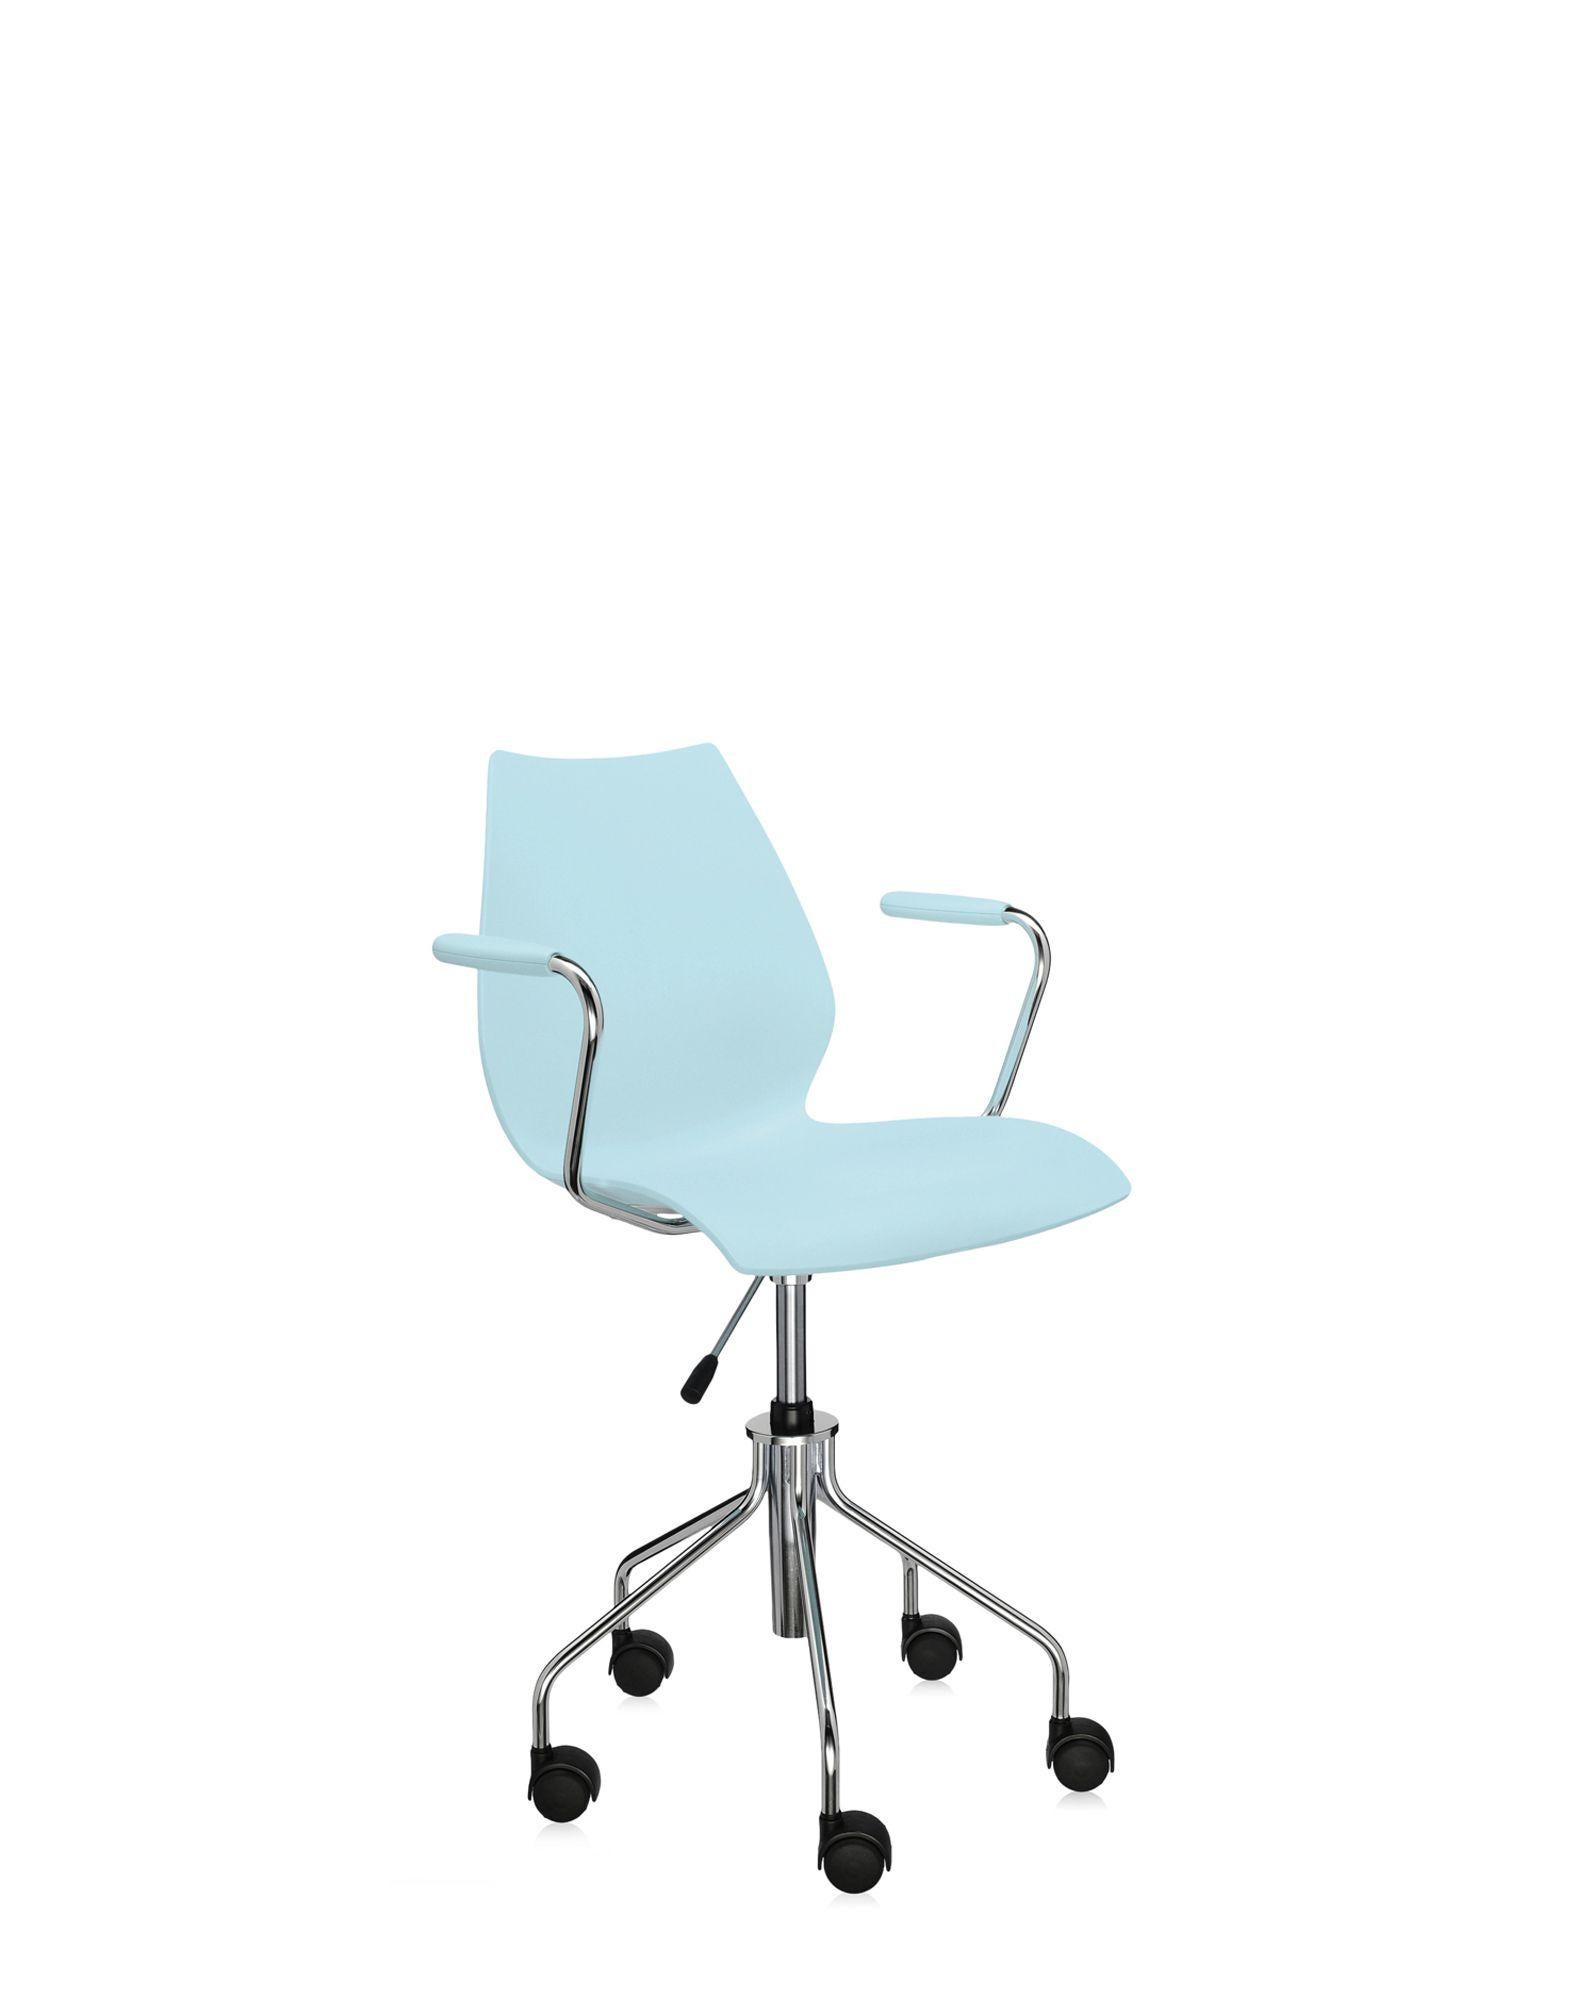 pale blue office chair